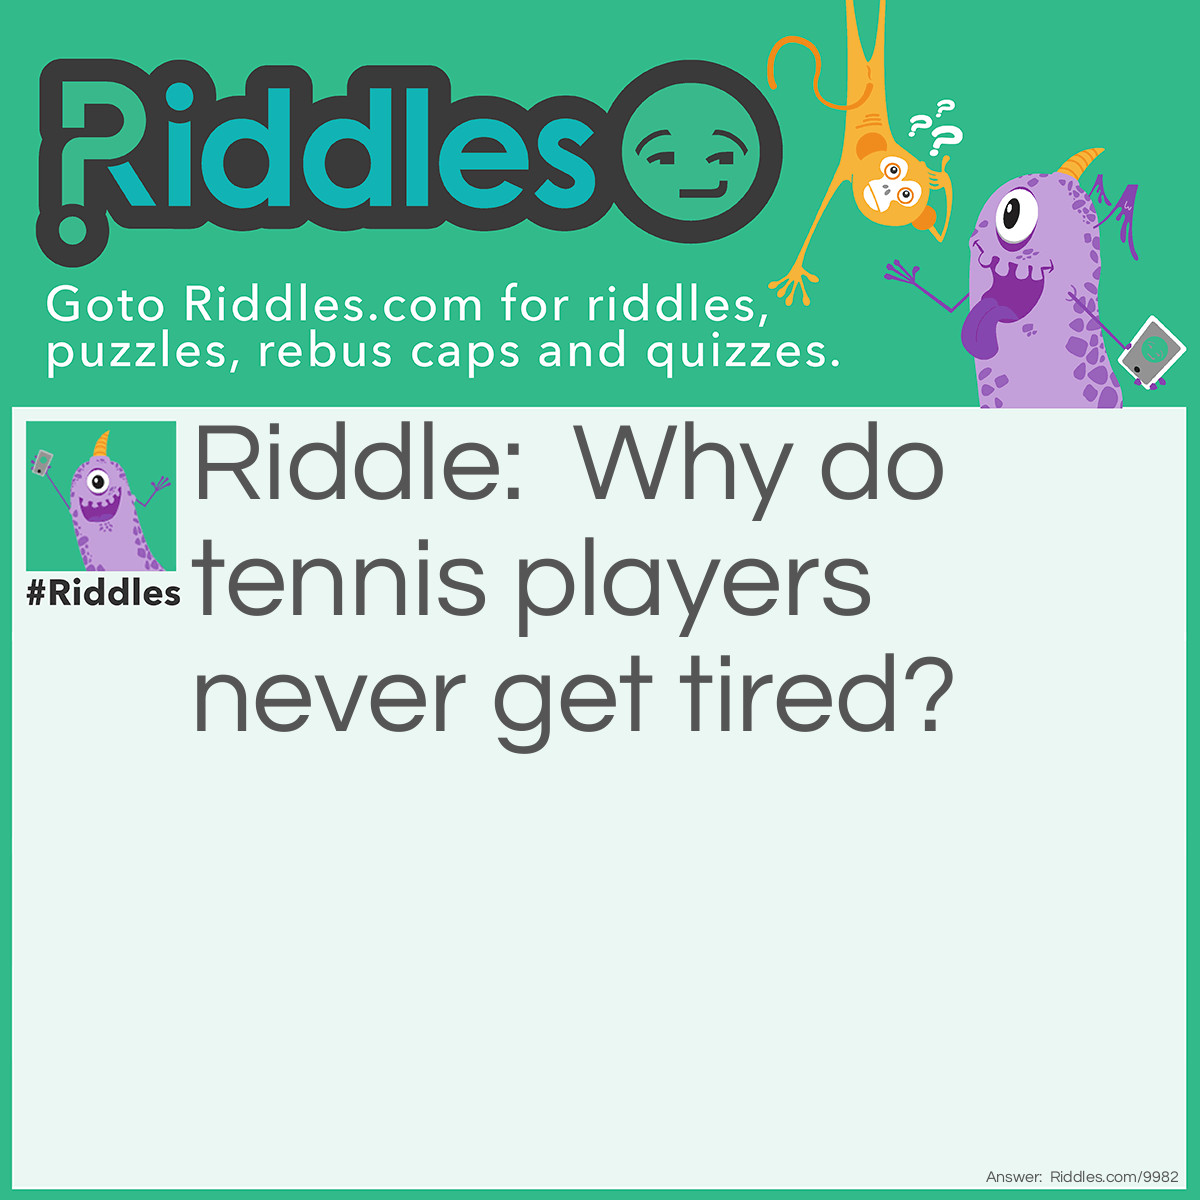 Riddle: Why do tennis players never get tired? Answer: Because they have many fans!